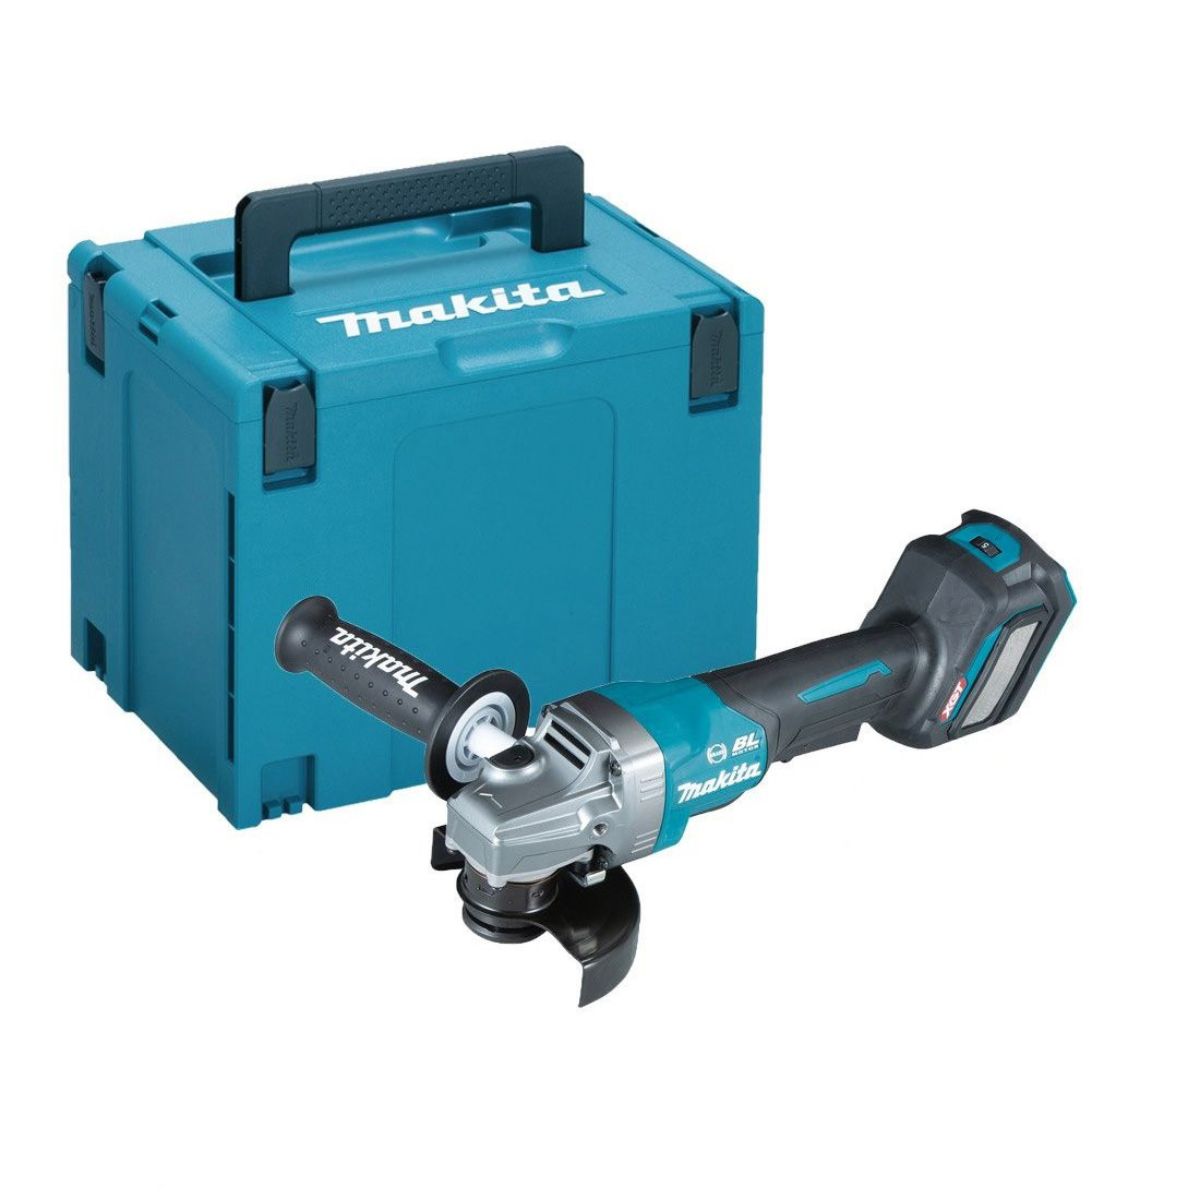 Makita GA028GZ01 40v XGT Max 115mm Brushless Angle Grinder Body Only With Carry Case